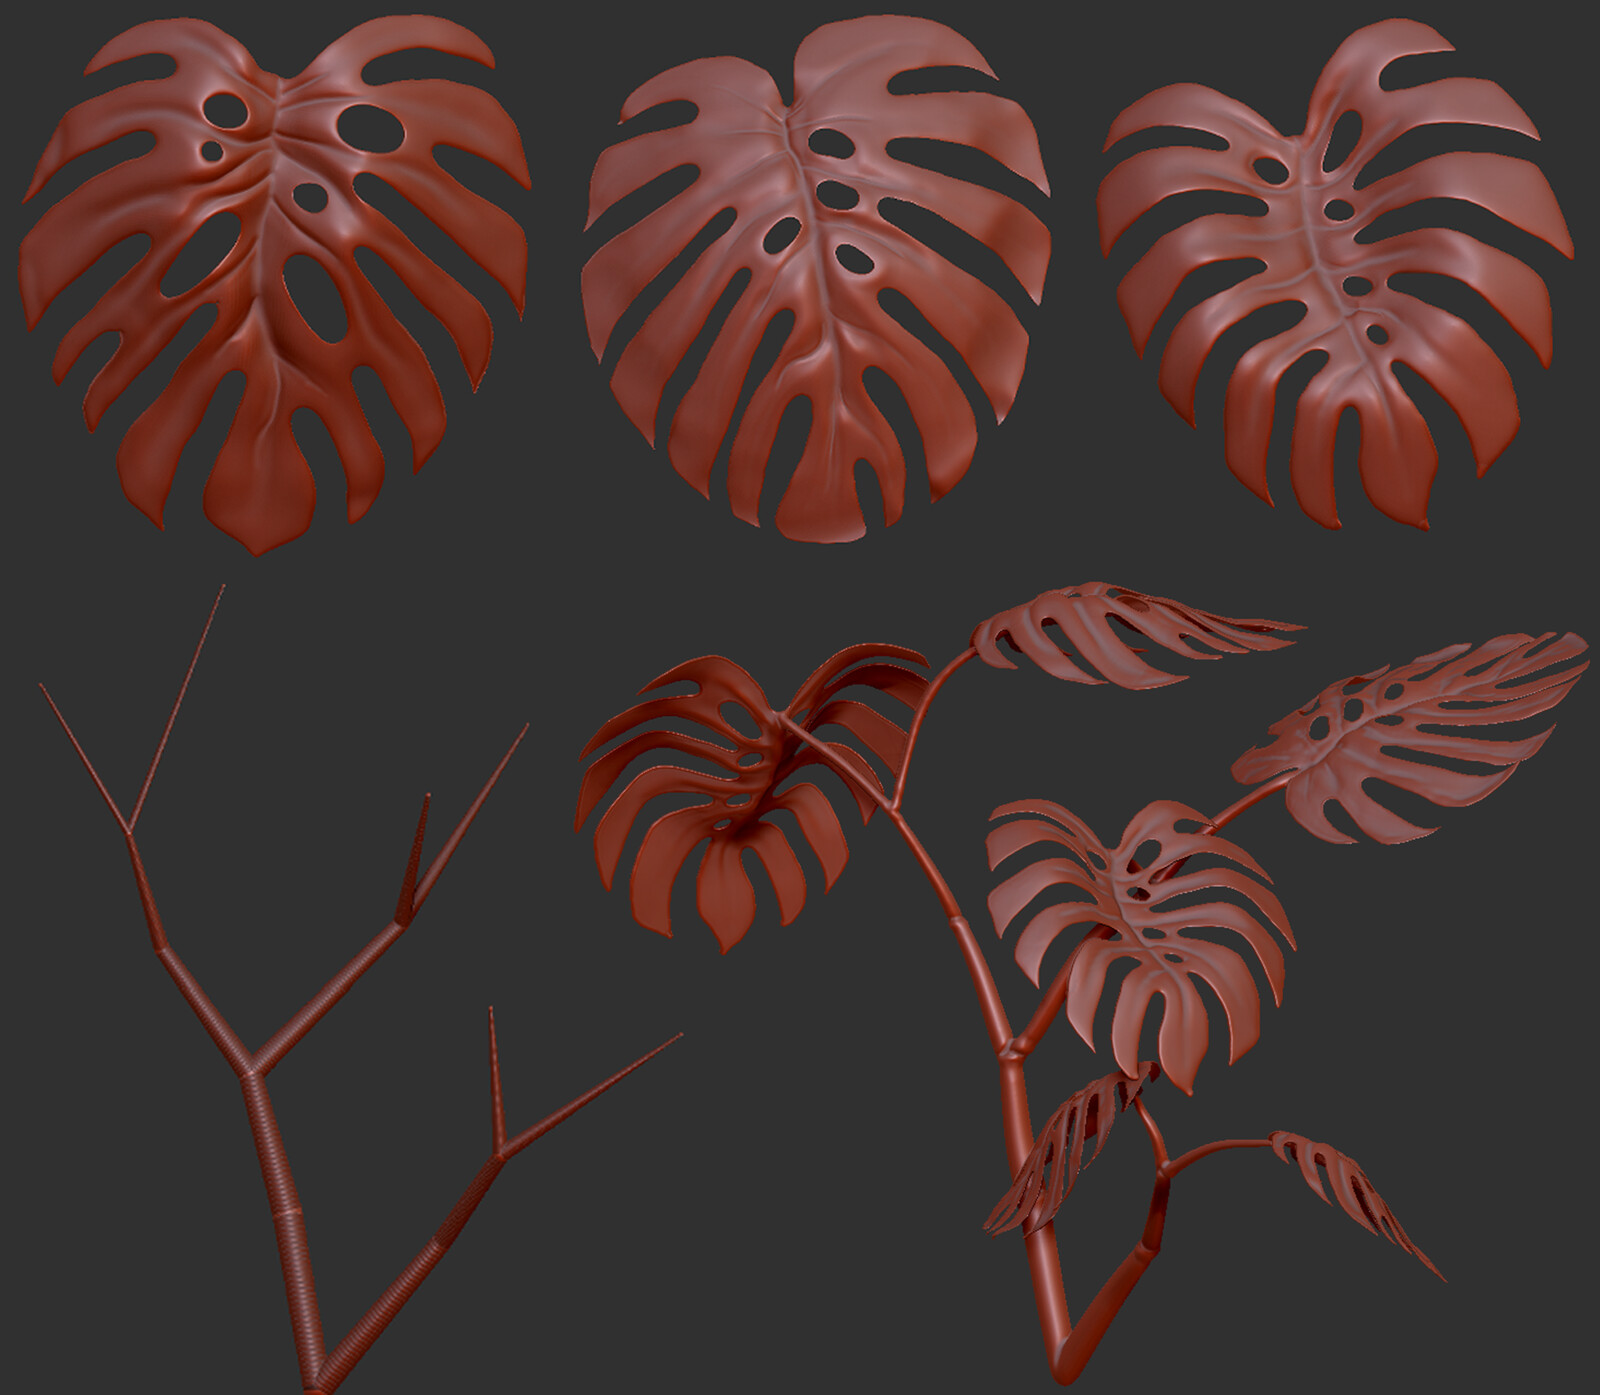 Sculpting in zbrushcore started with masking out 3 main leaf shapes on a plane, and using zspheres to block-out the branches